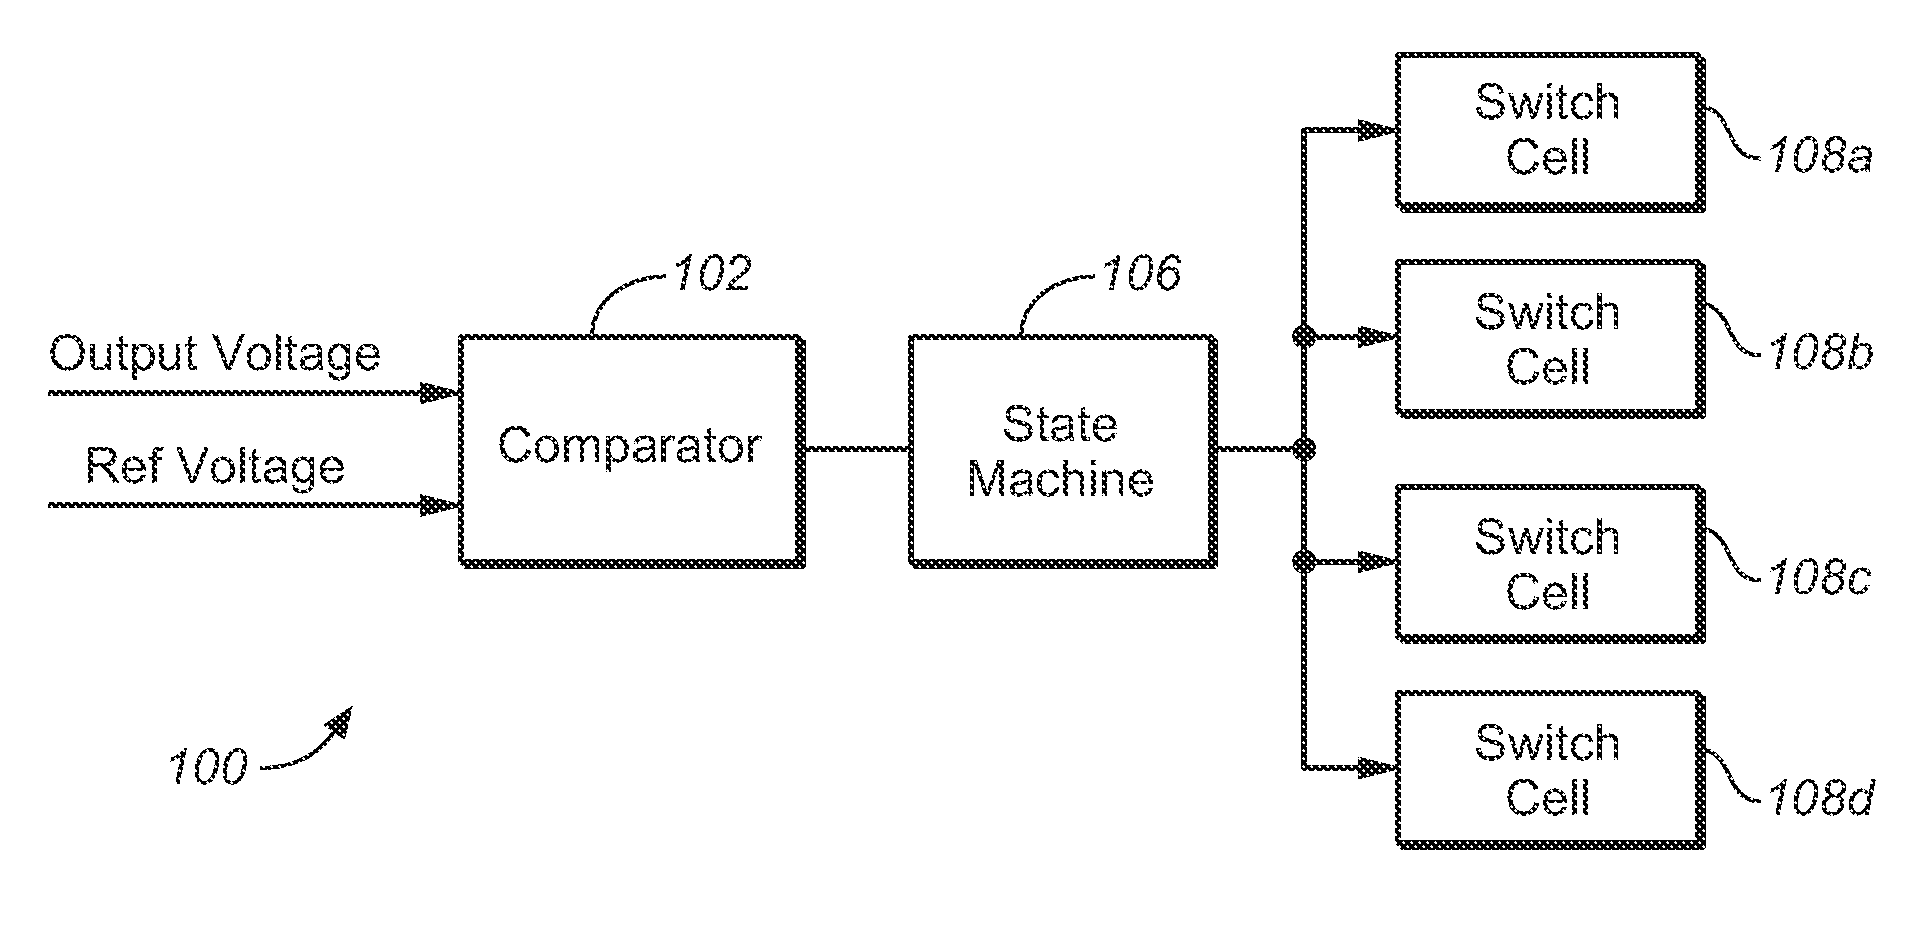 Voltage regulator for an integrated circuit